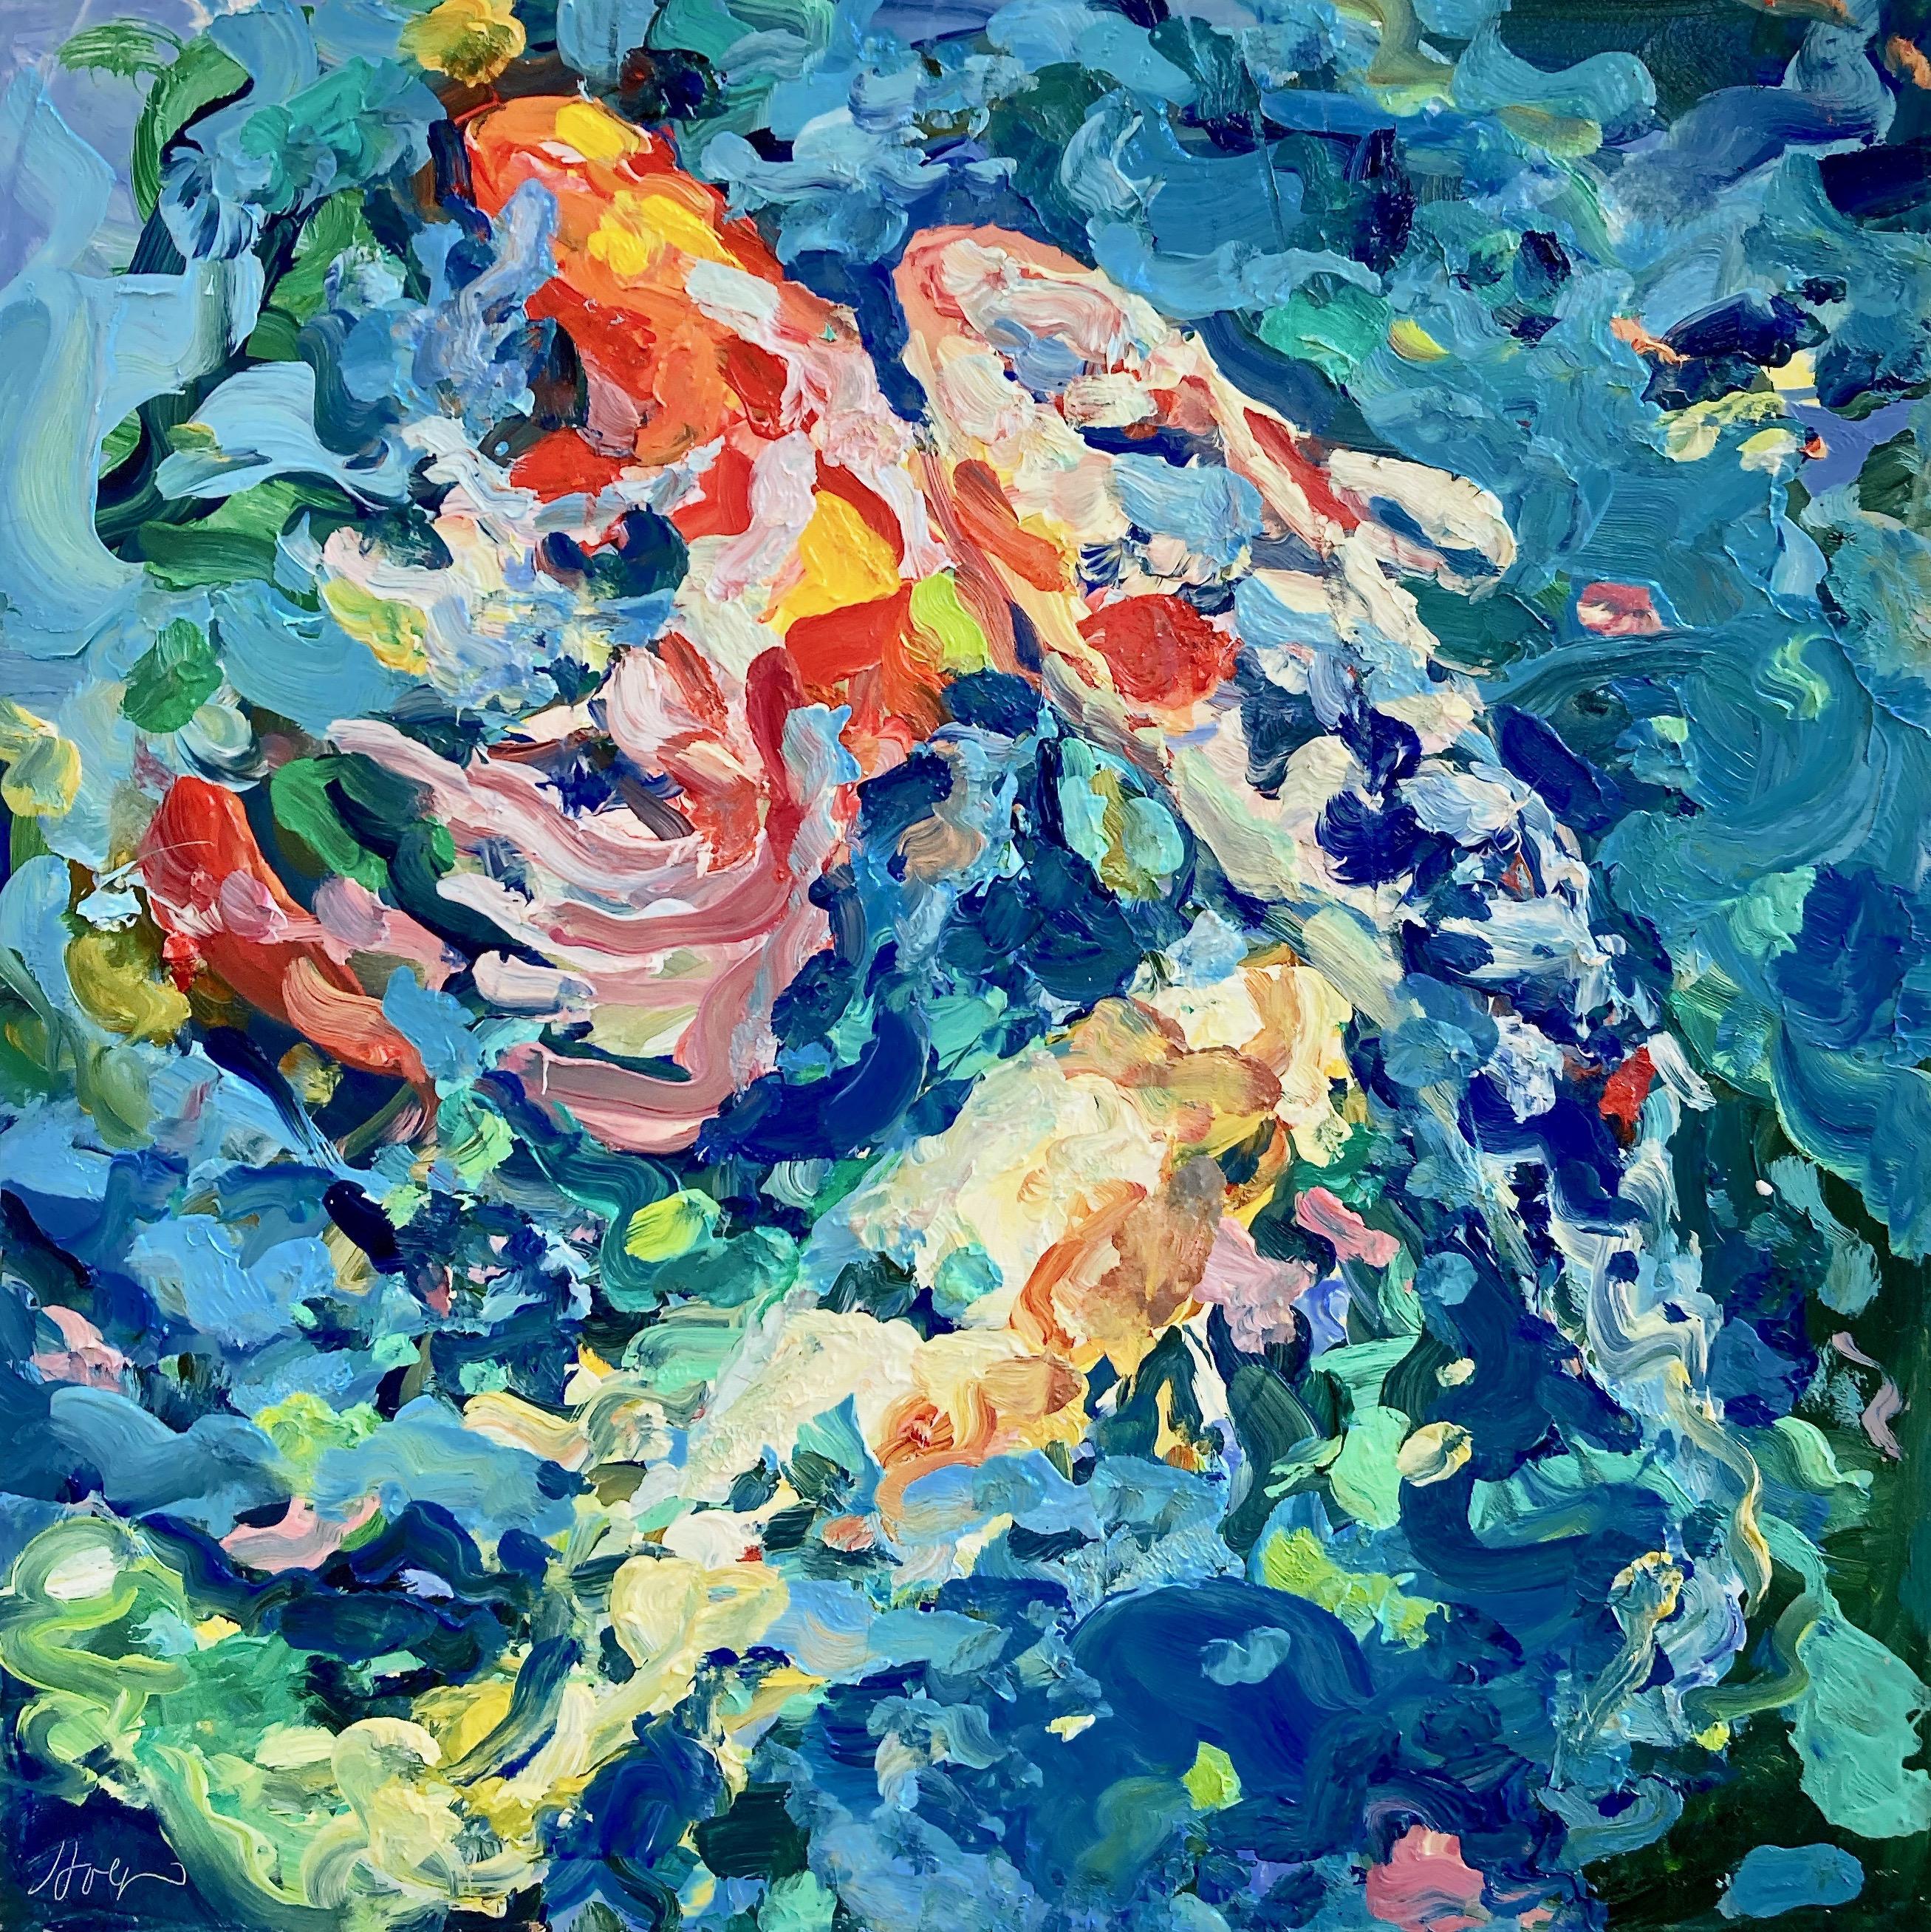 Linda Holt Animal Painting - "3 Koi Underwater Landscape"  Bright abstract fish, blues, red, orange, green